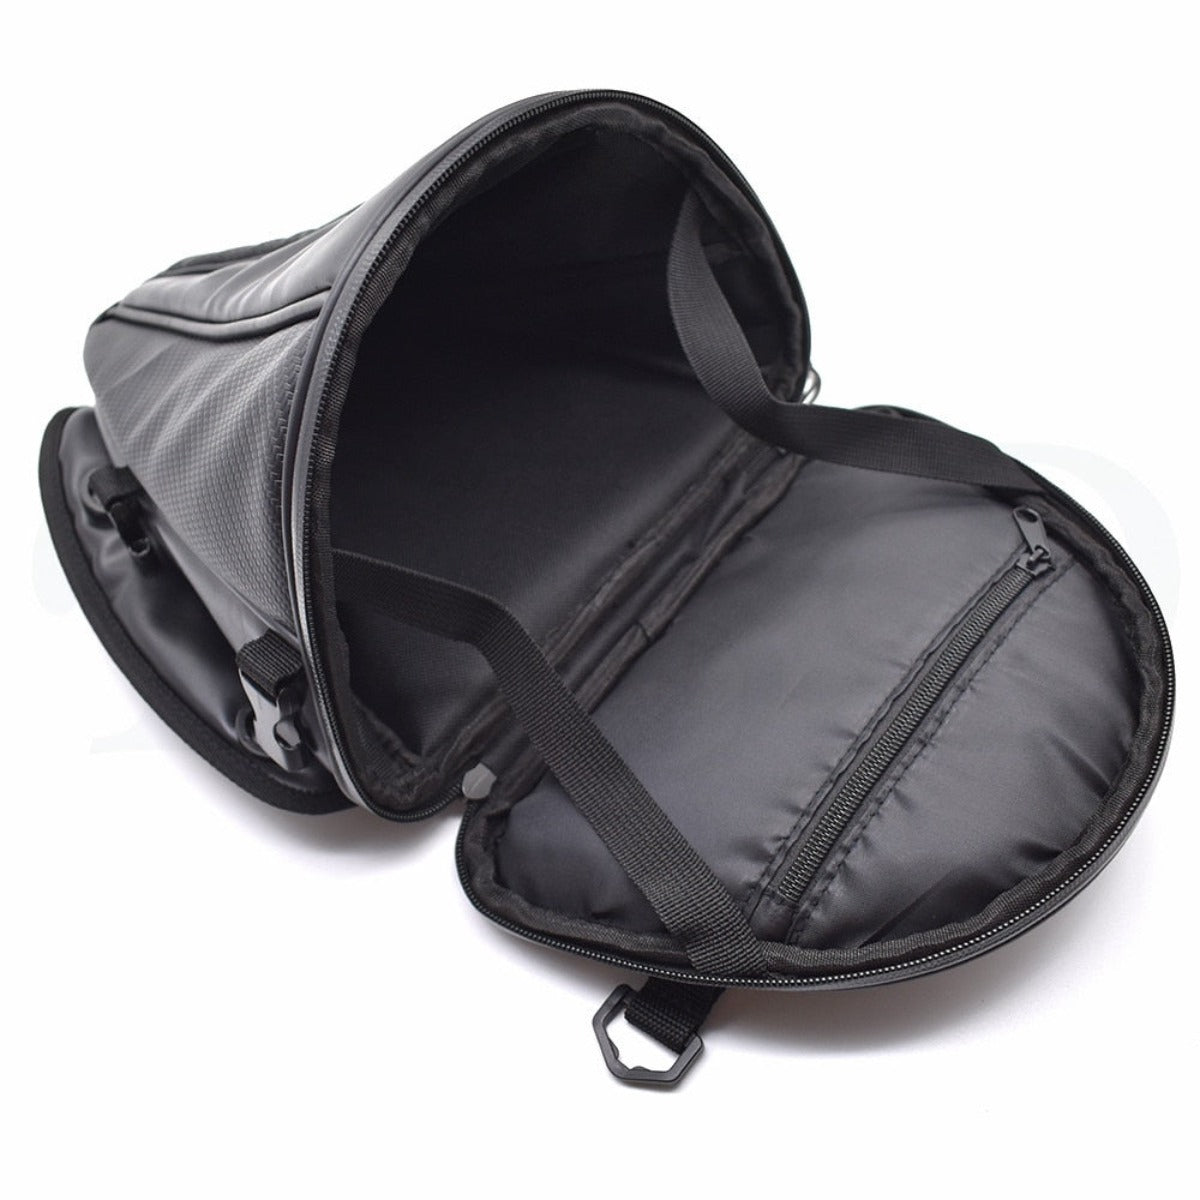 Stunning Retro Backseat Tail Bag for Motorcycles - American Legend Rider